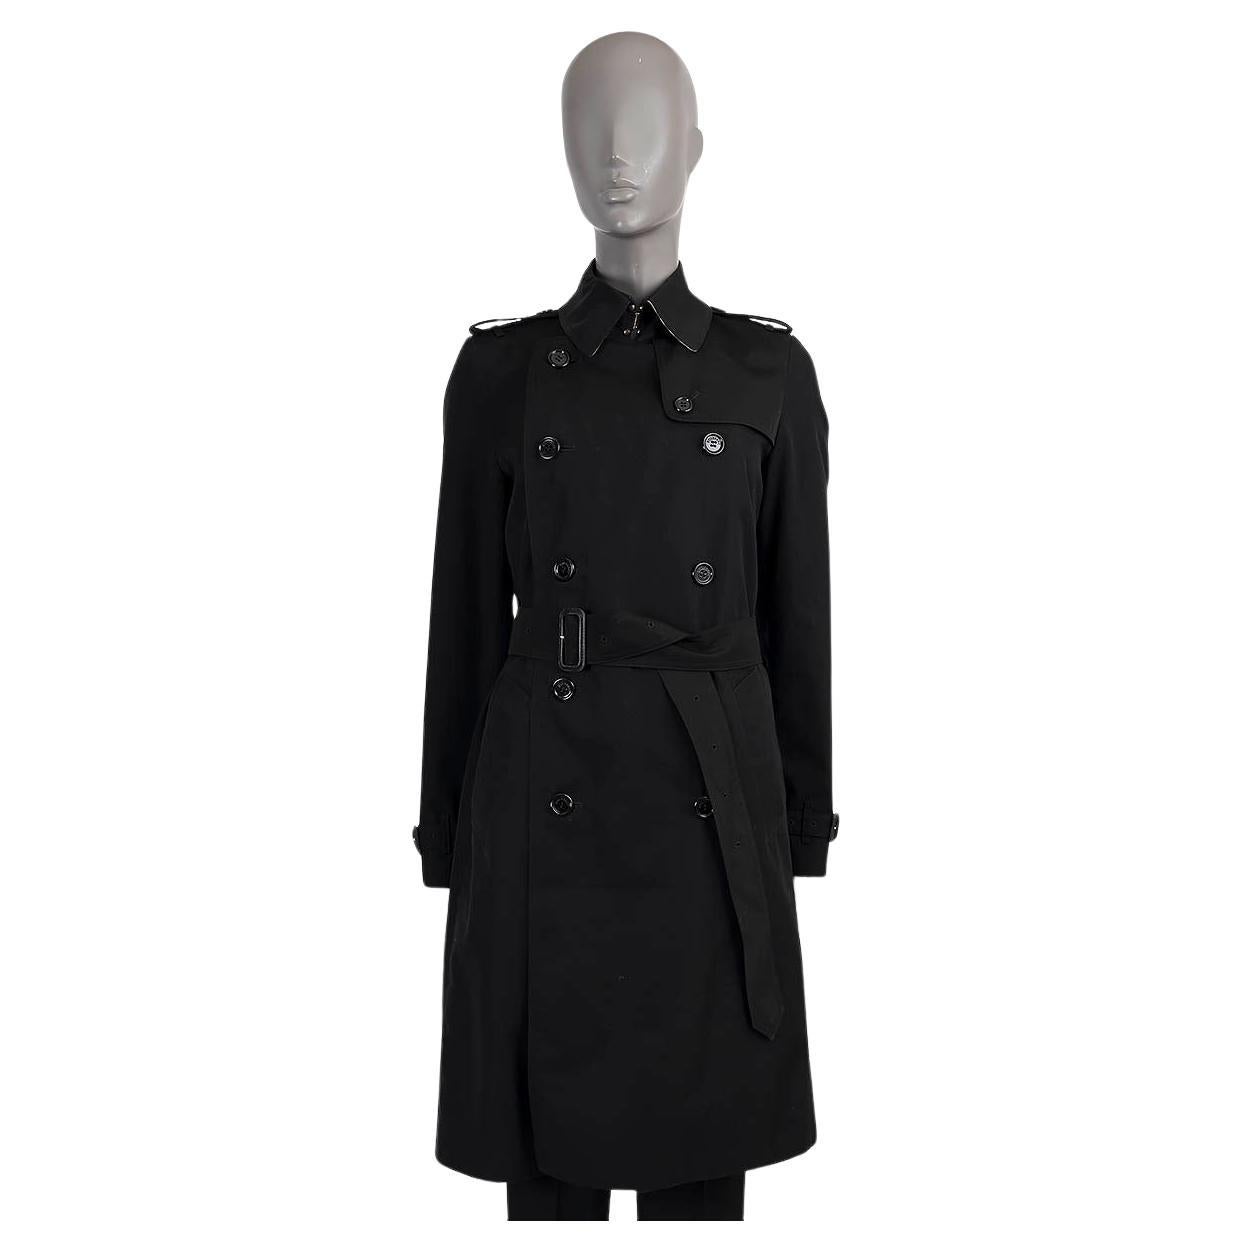 BURBERRY black cotton blend WATERLOO Trench Coat Jacket 10 M For Sale